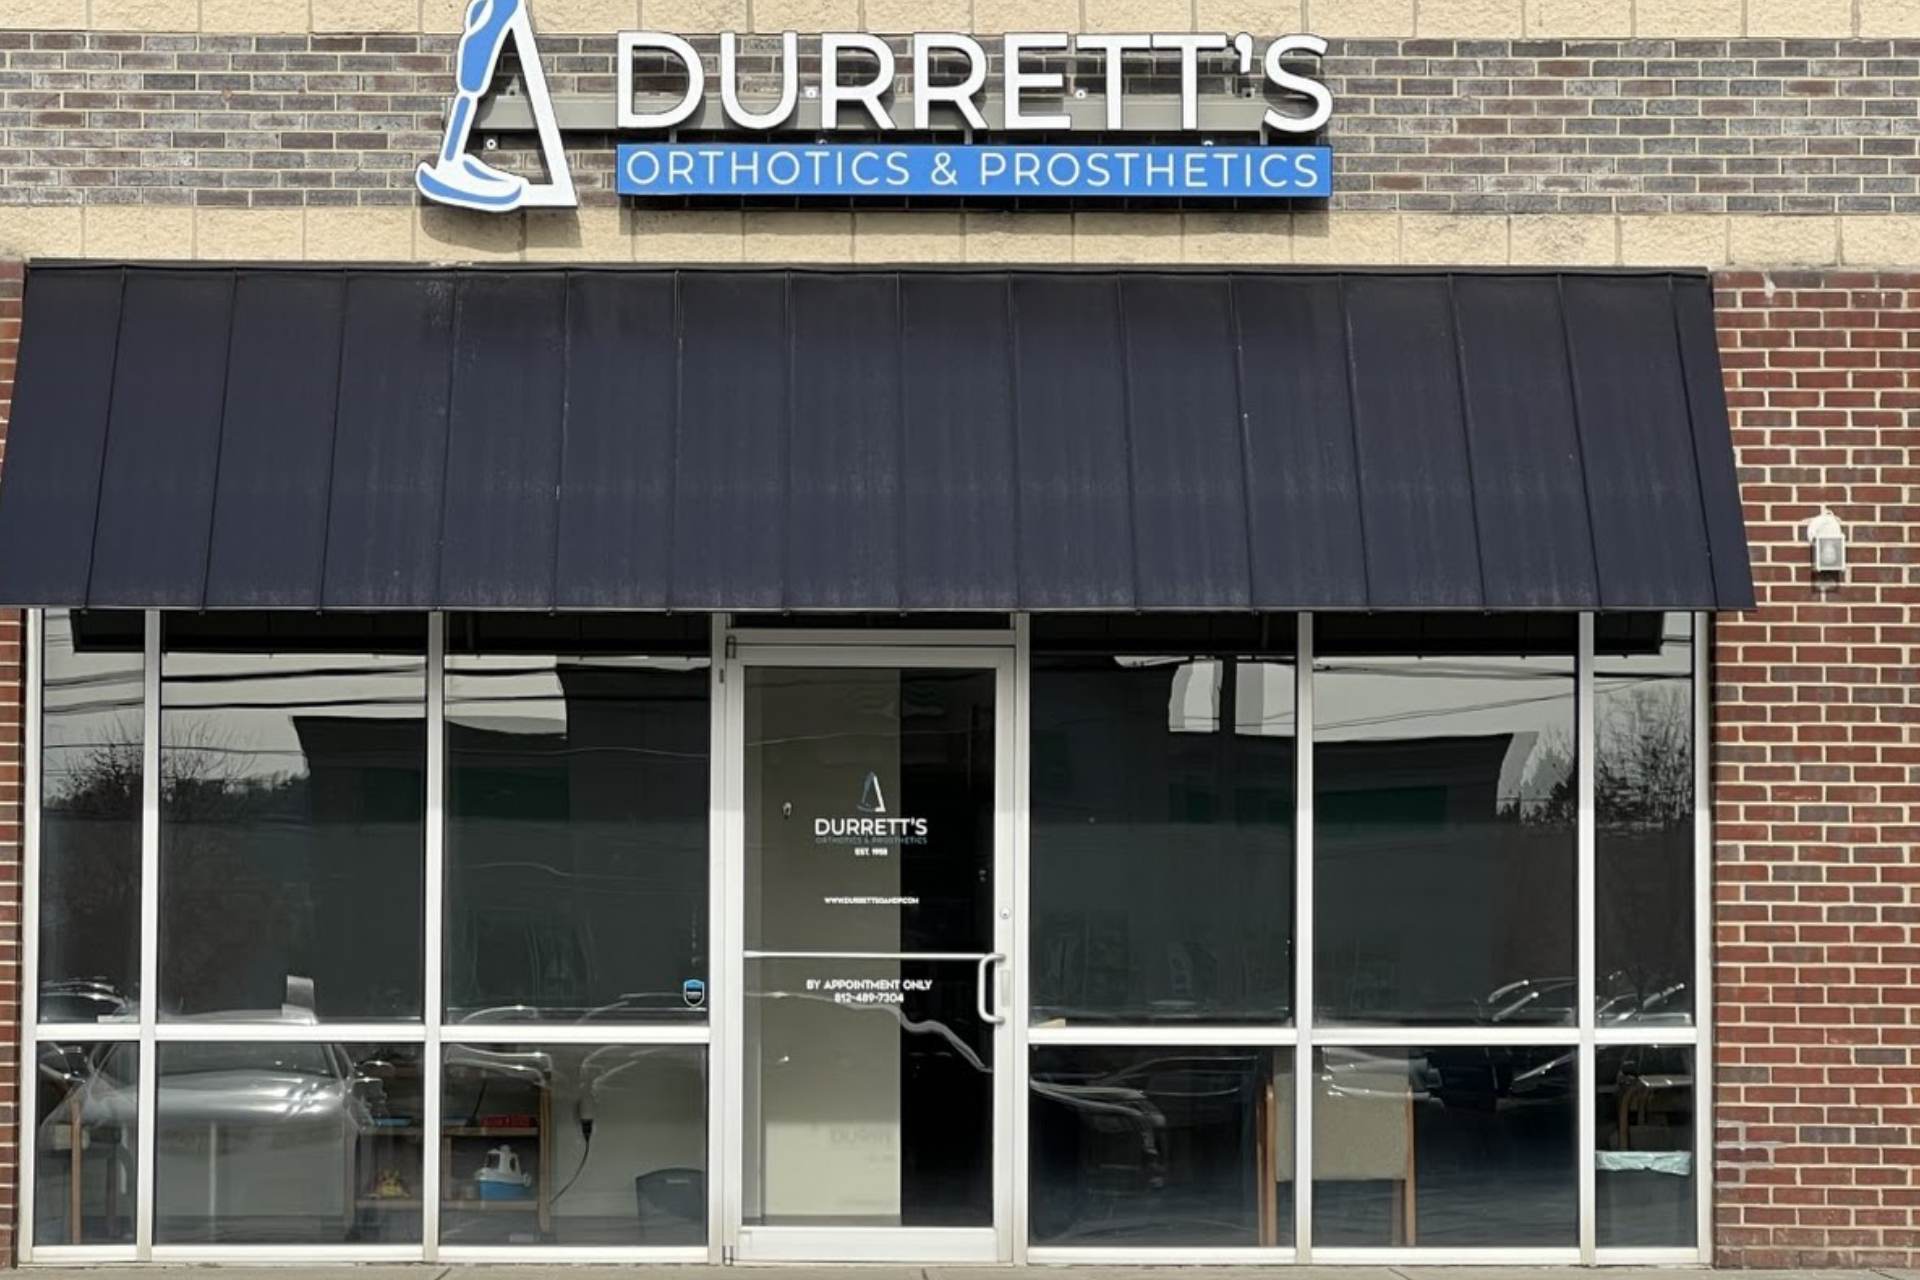 Photograph of storefront location of Durrett’s Orthotics and Prosthetics office near Lawrenceburg, Indiana (IN)